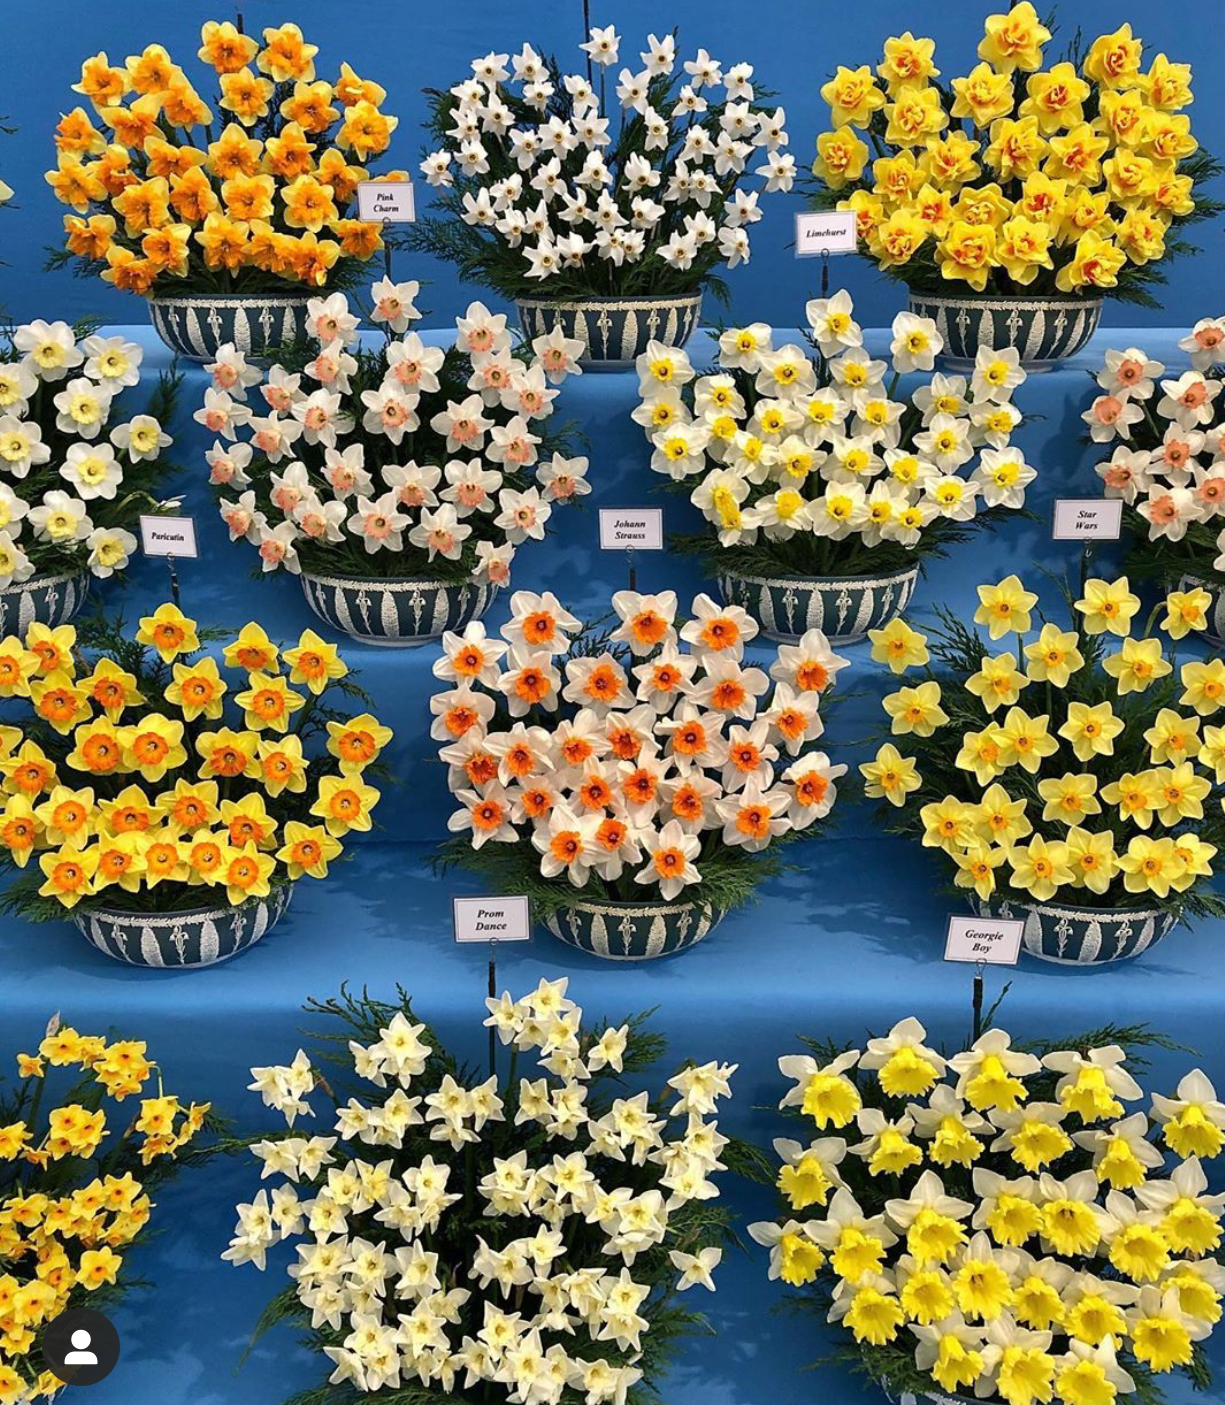 Daffodils at Chelsea Flower Show